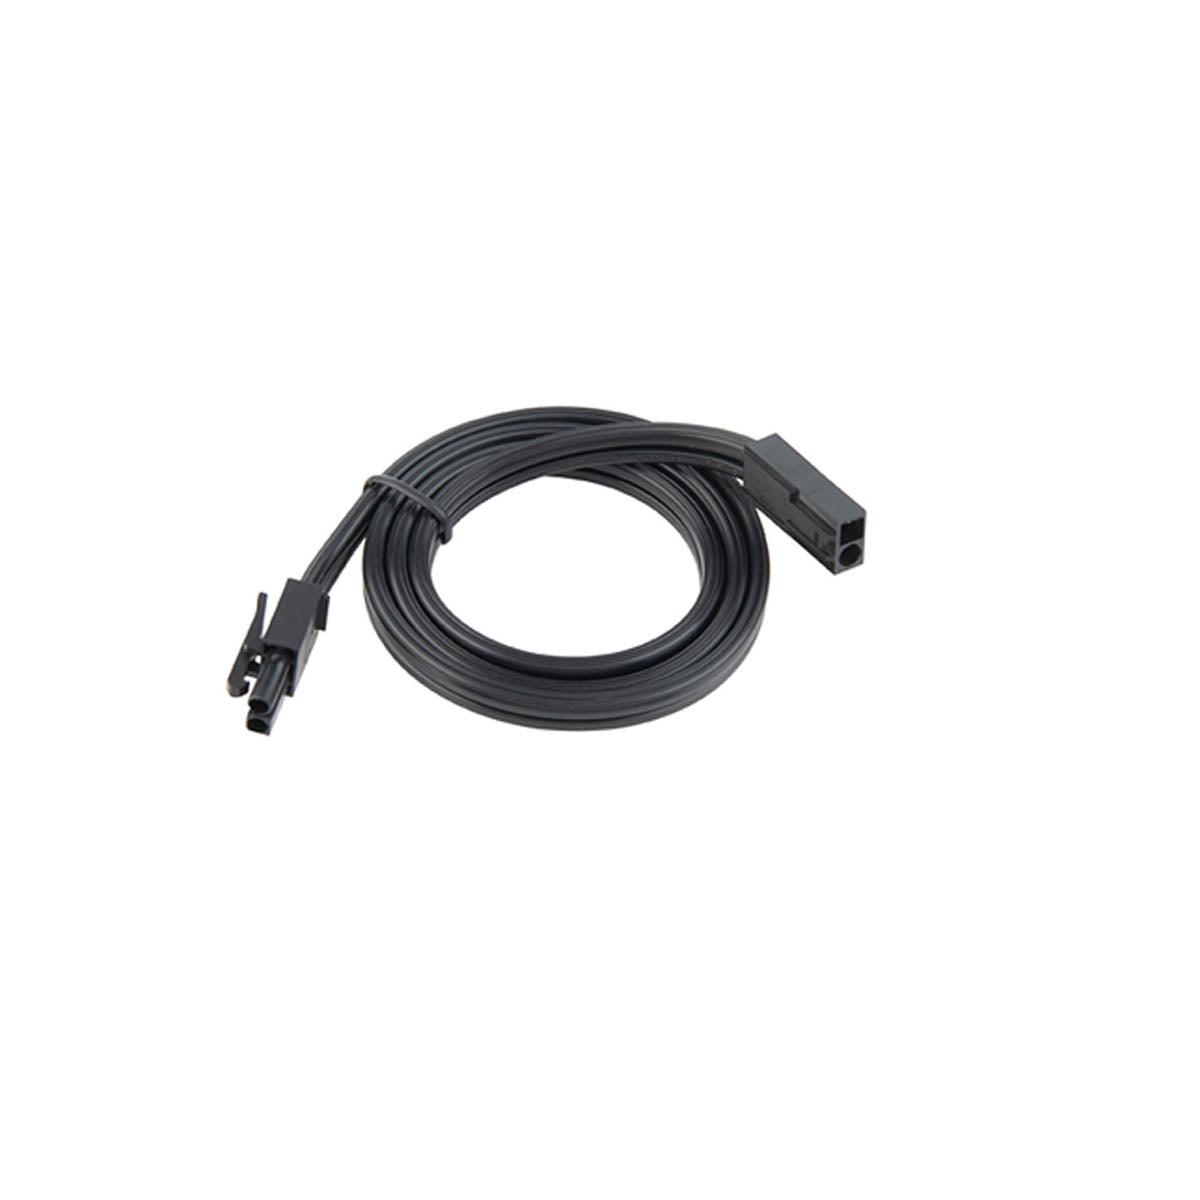 36in. Interconnect Cable for 3-CCT Puck Light, Black - Bees Lighting